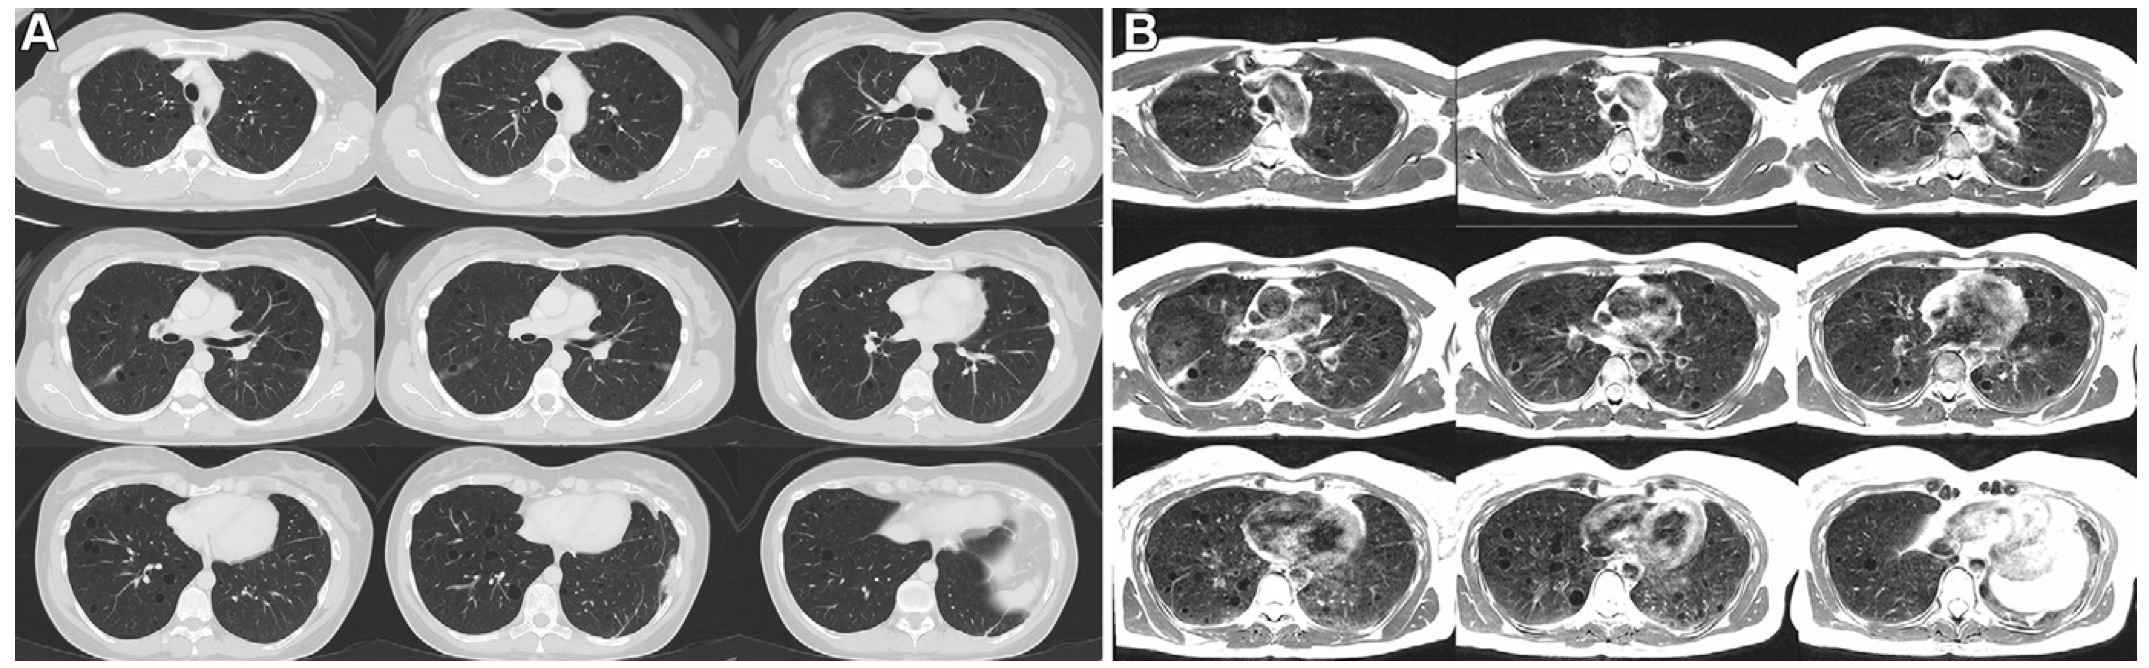 0.55T MRI Effective in Lung Imaging